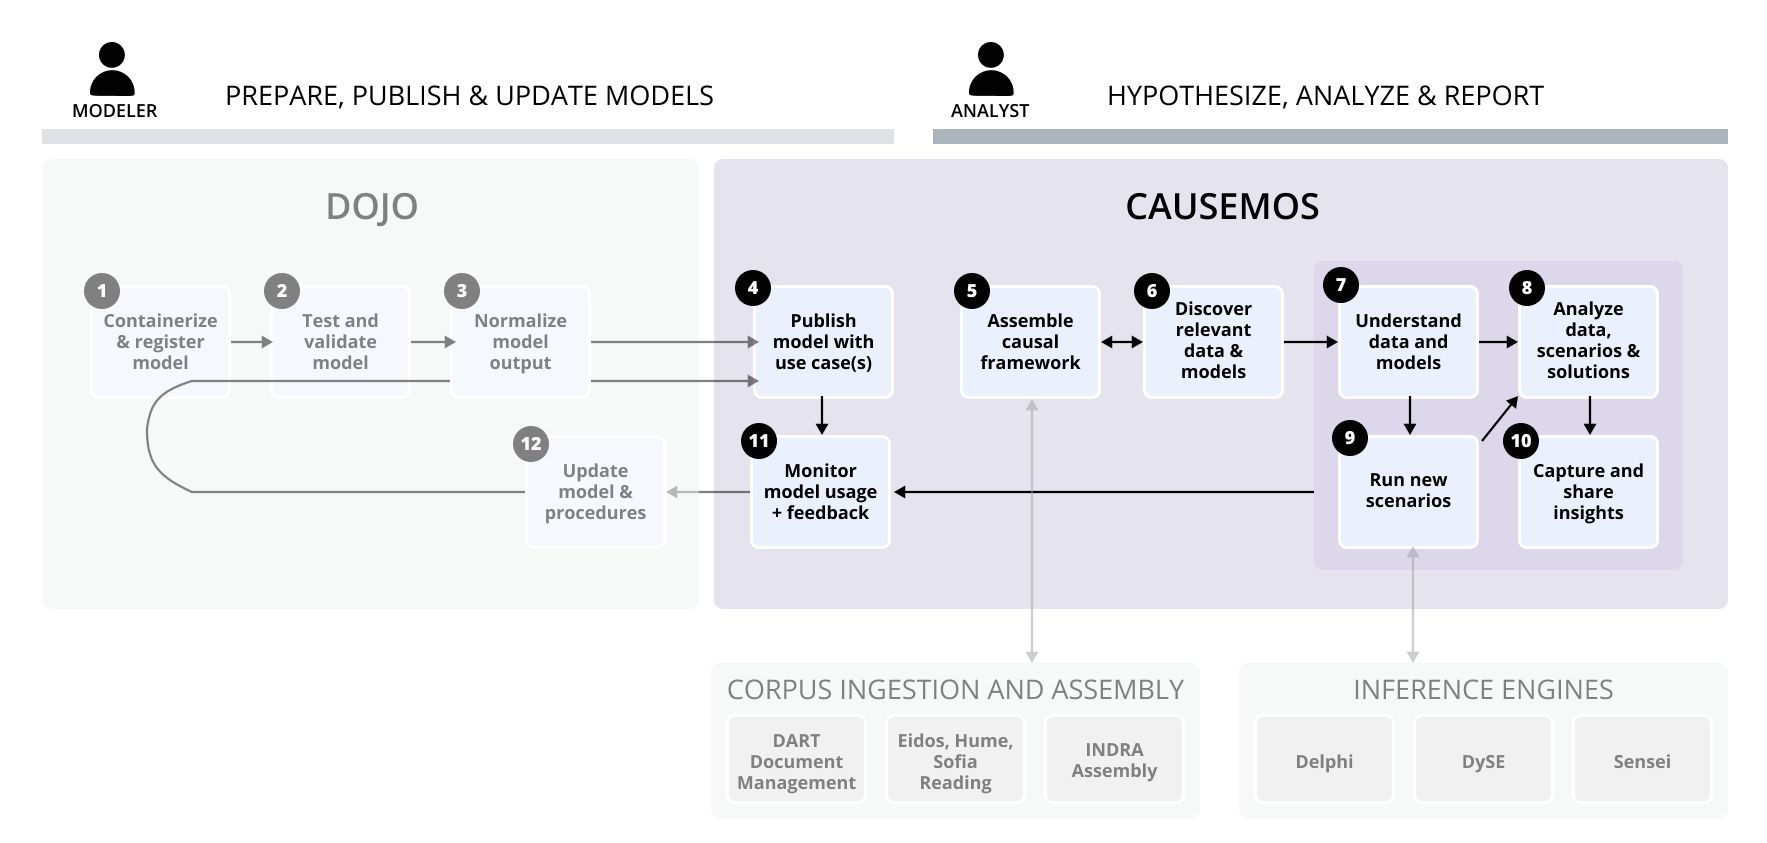 Workflows supported by Causemos in the World Modelers system.